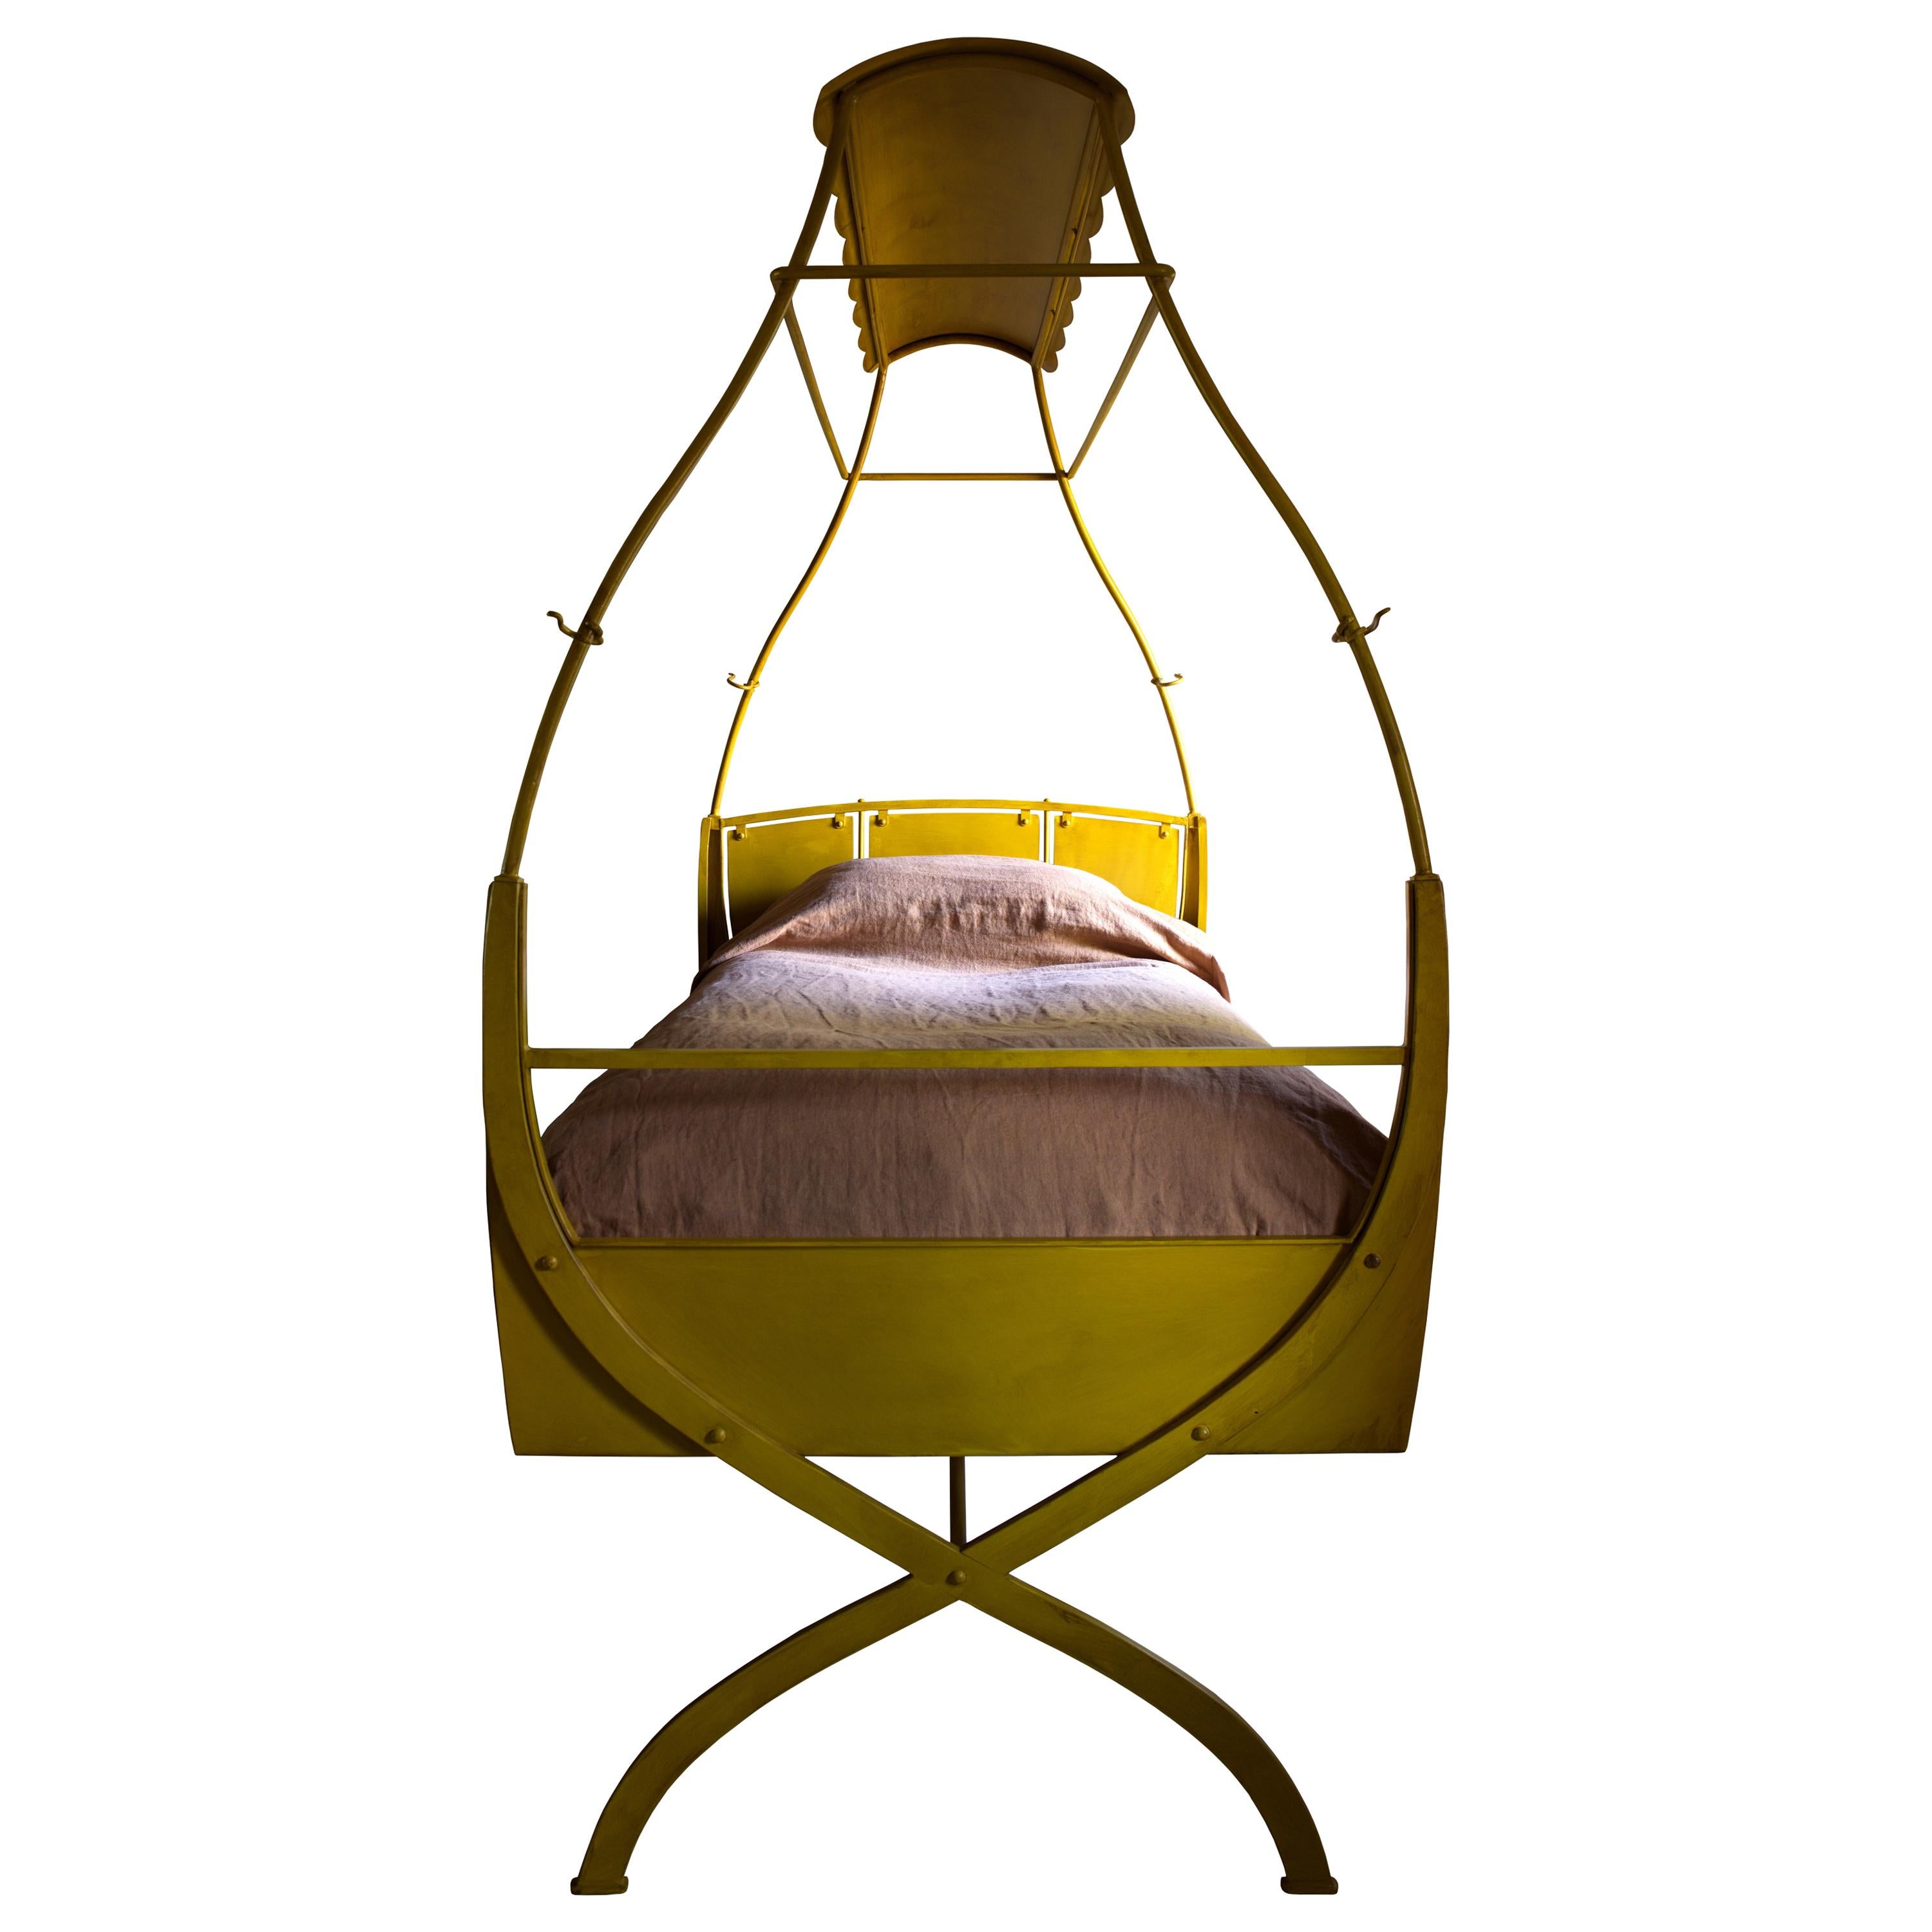 Canary Bed, Painted Steel X-Frame Bed, Part Fairground Ride and Part Swing